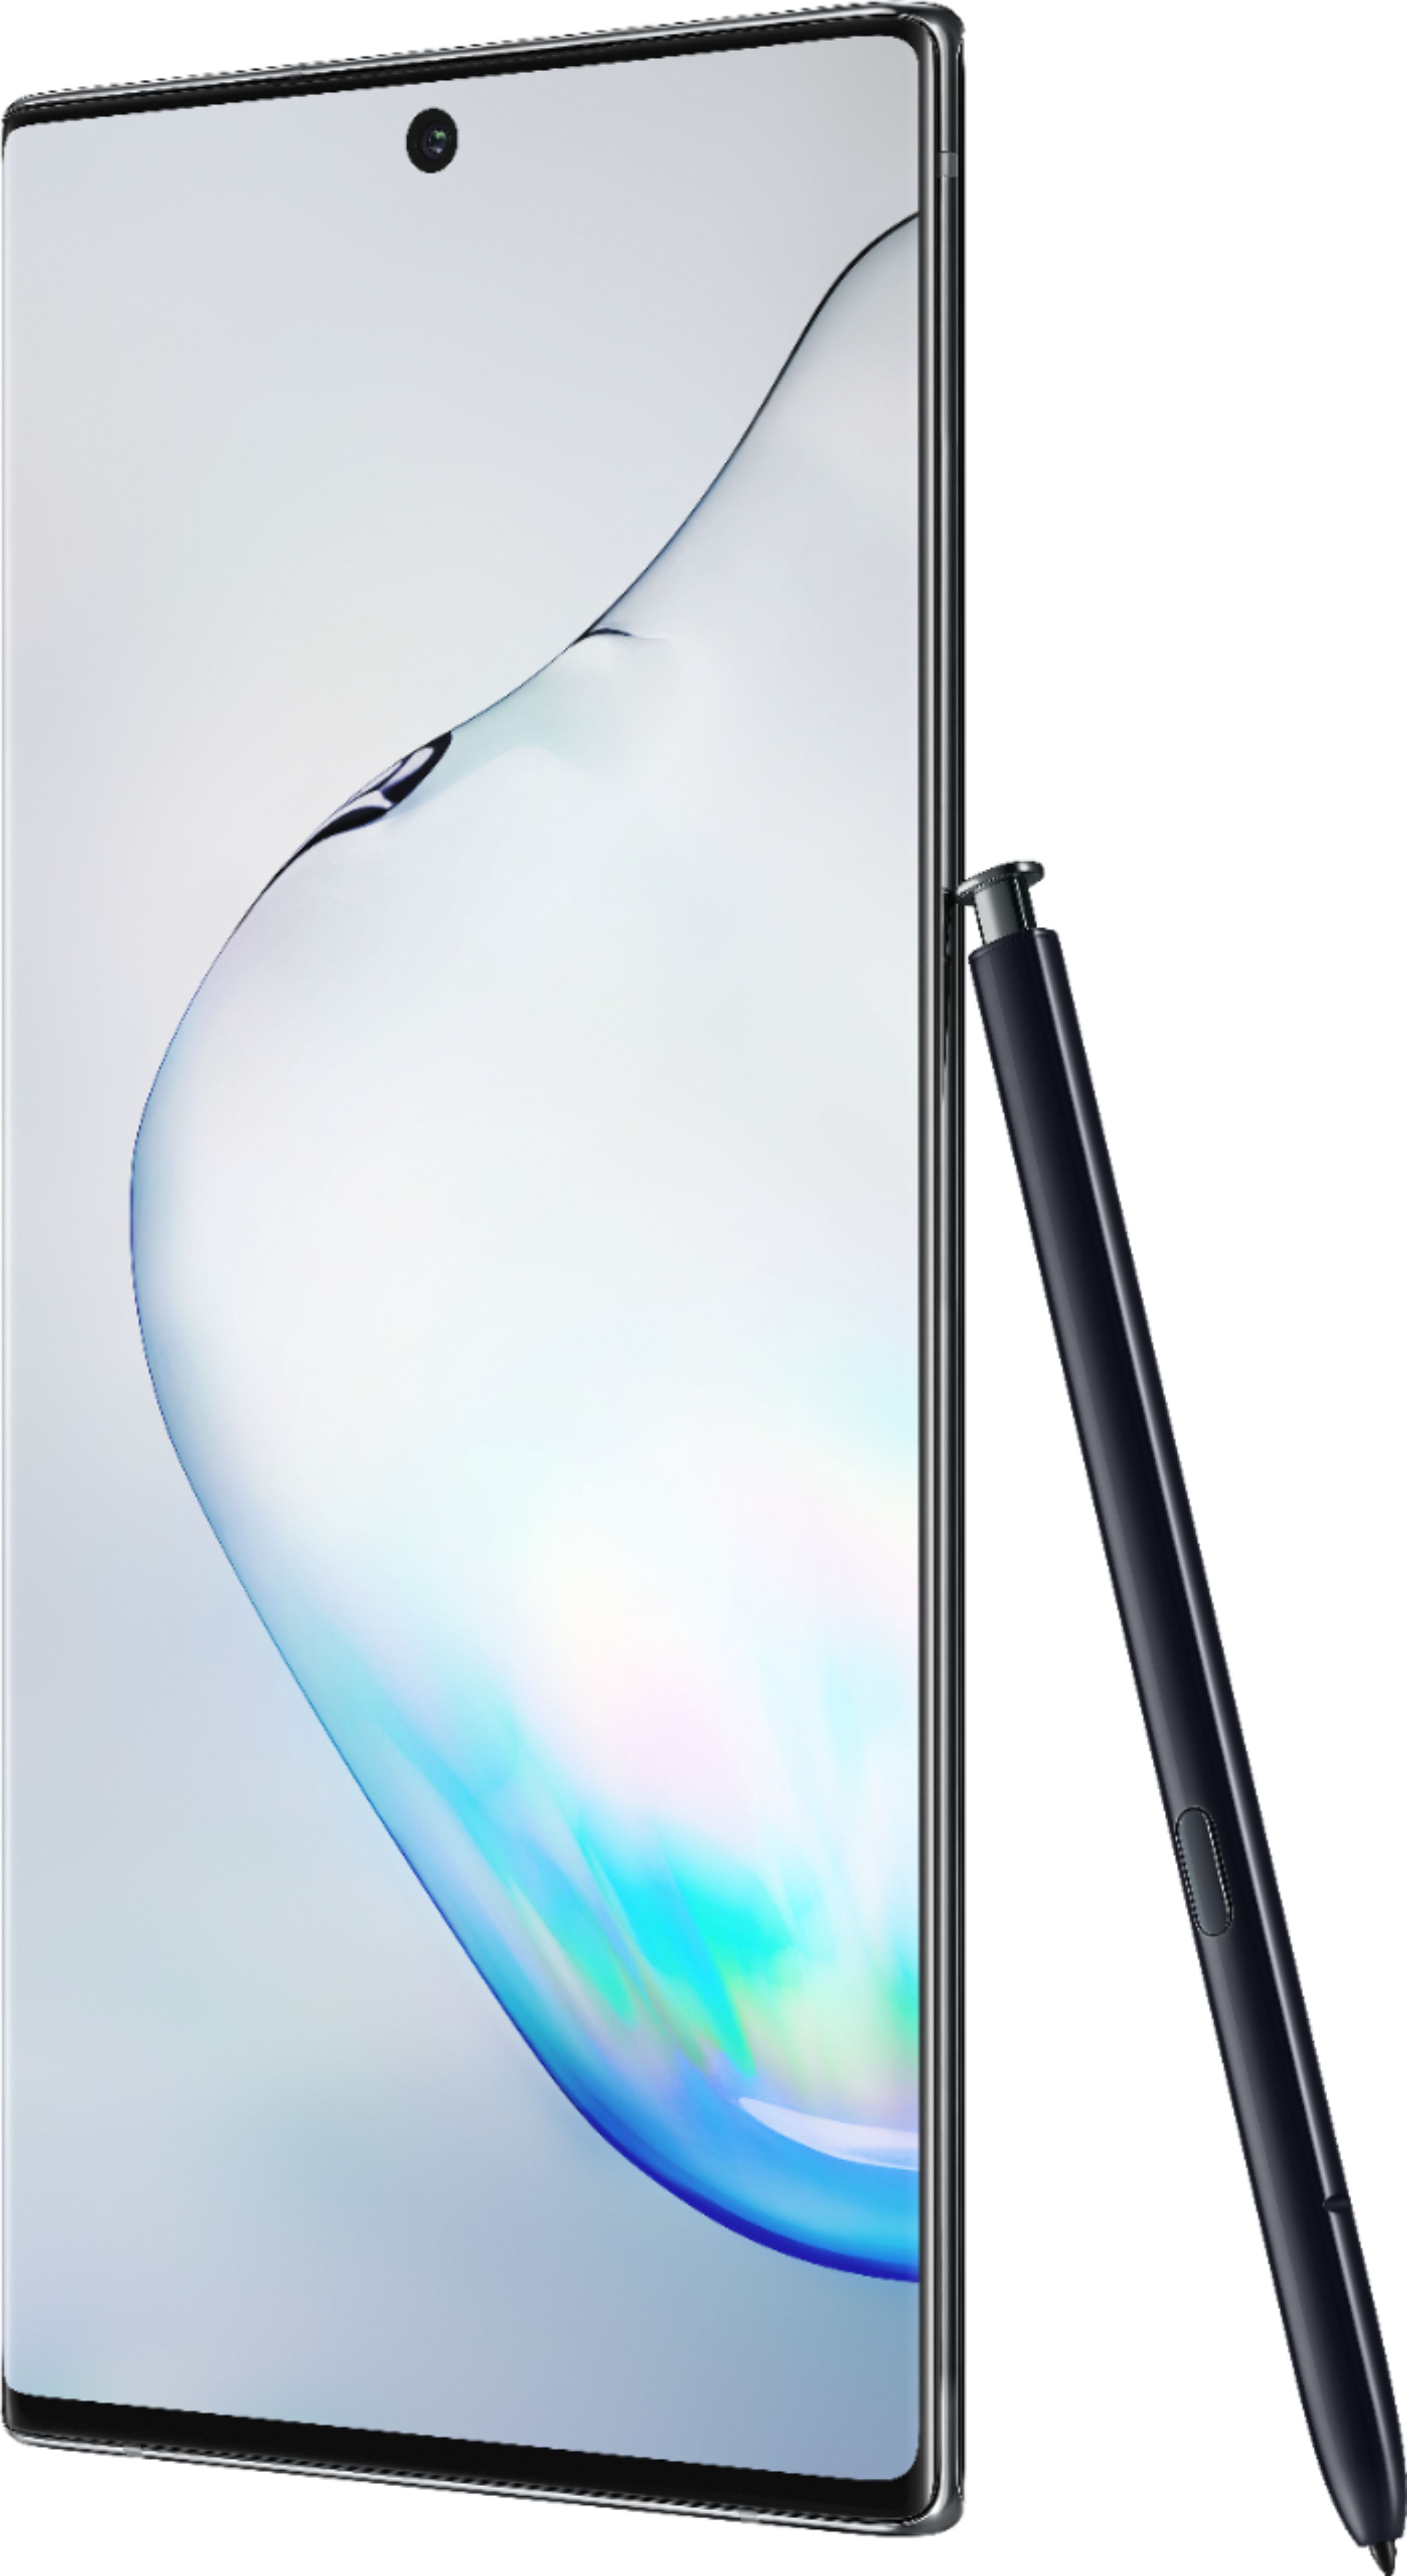 Galaxy Note 10, Note 10 Plus, and Note 10 Plus 5G: Prices and